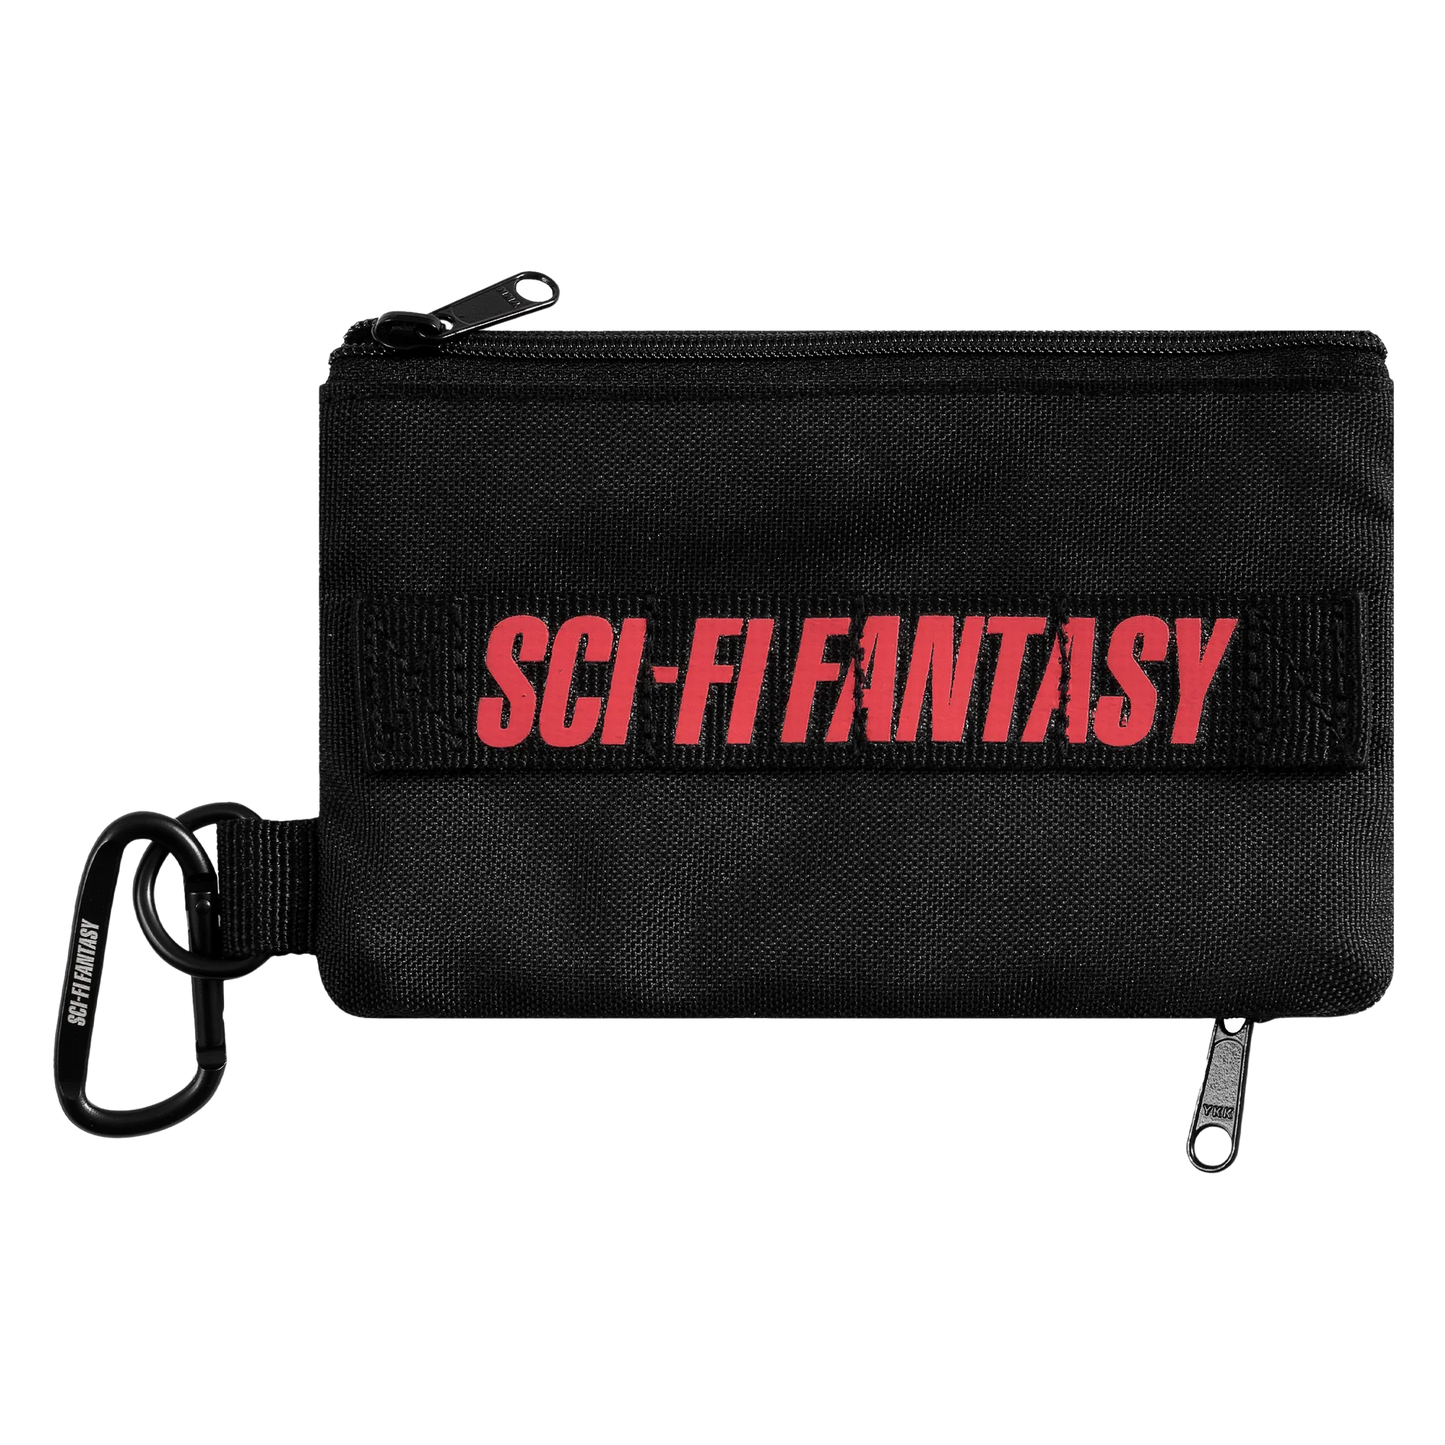 Sci Fi Fantasy - Carry-All Pouch - Black